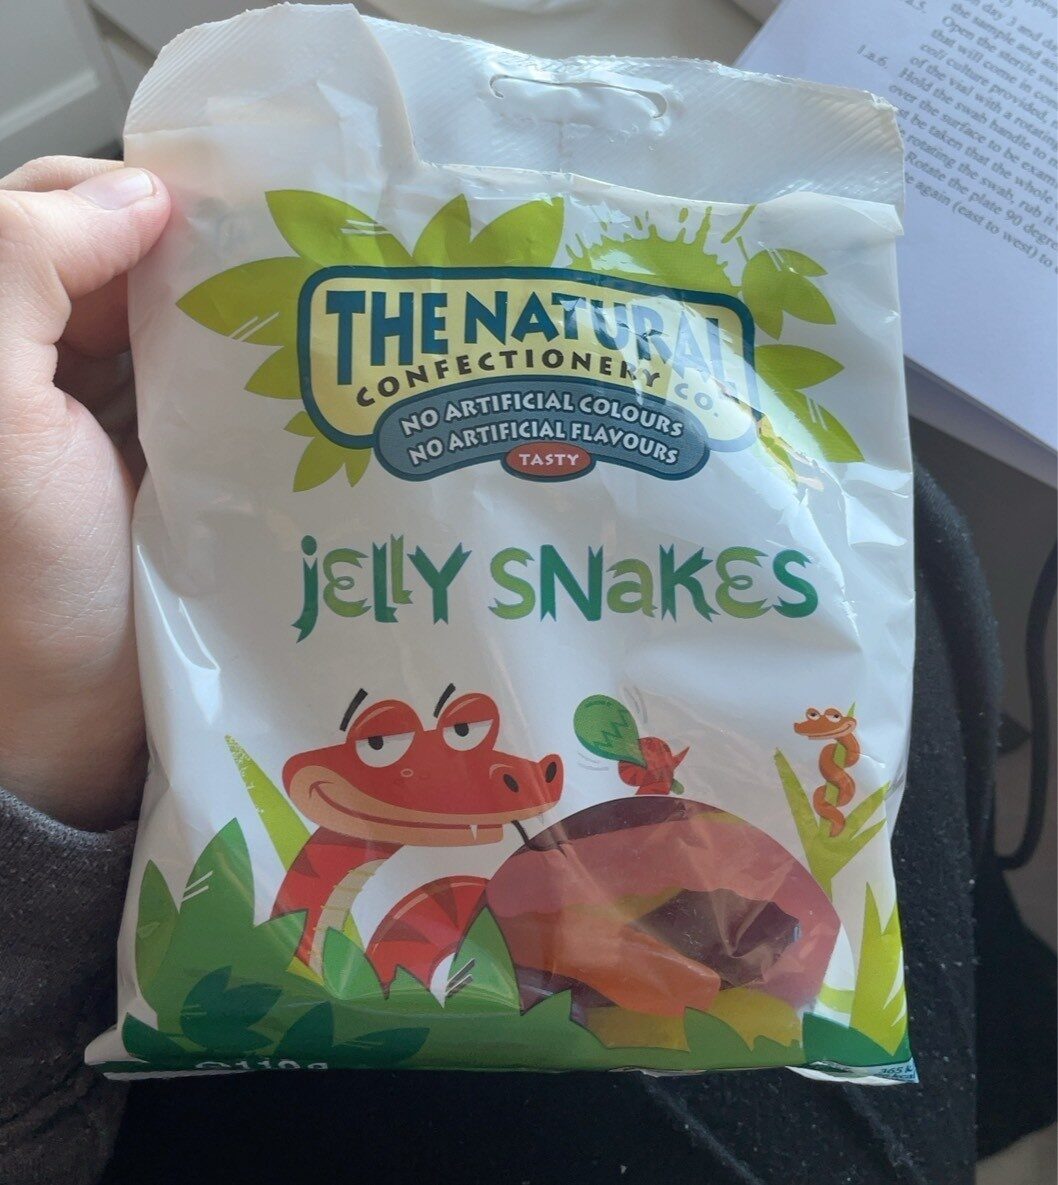 Jelly snakes - Product